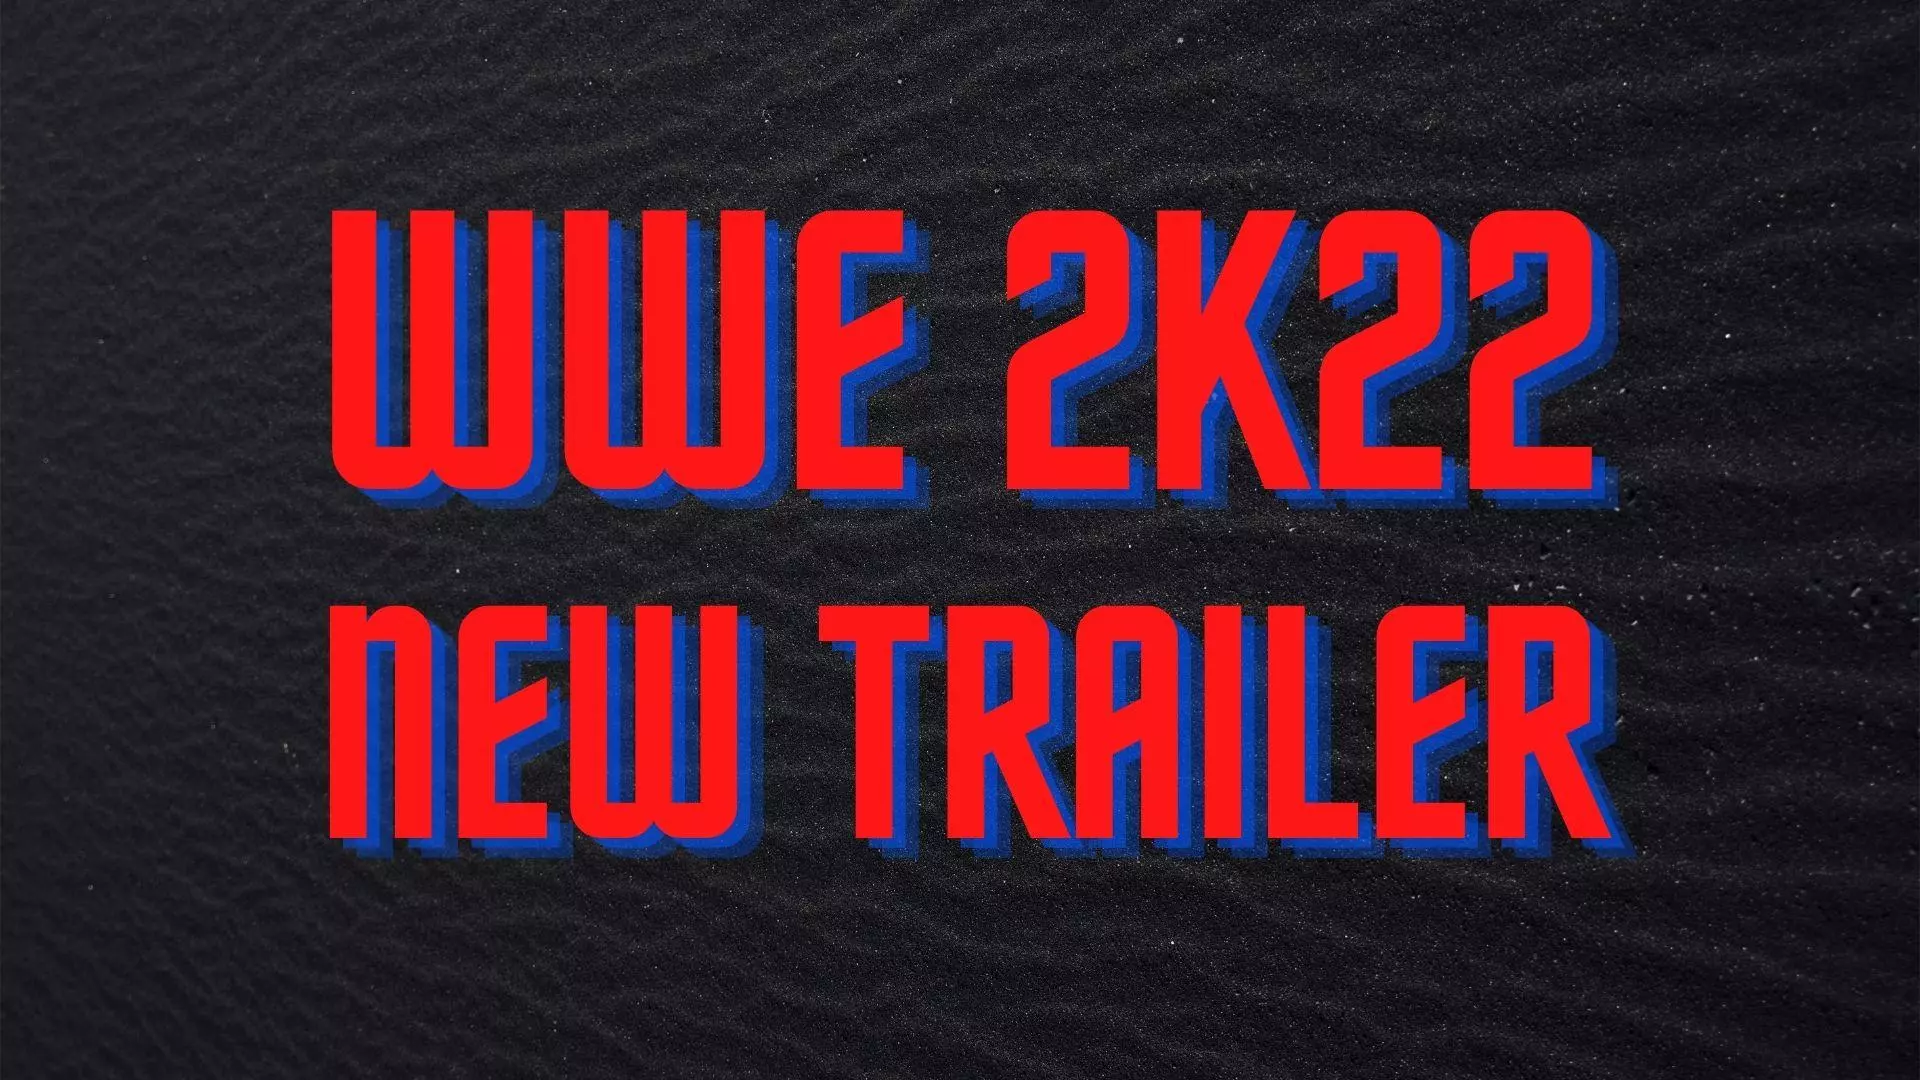 New WWE 2K22 Trailer Breakdown and Impressions, Release in March 2022